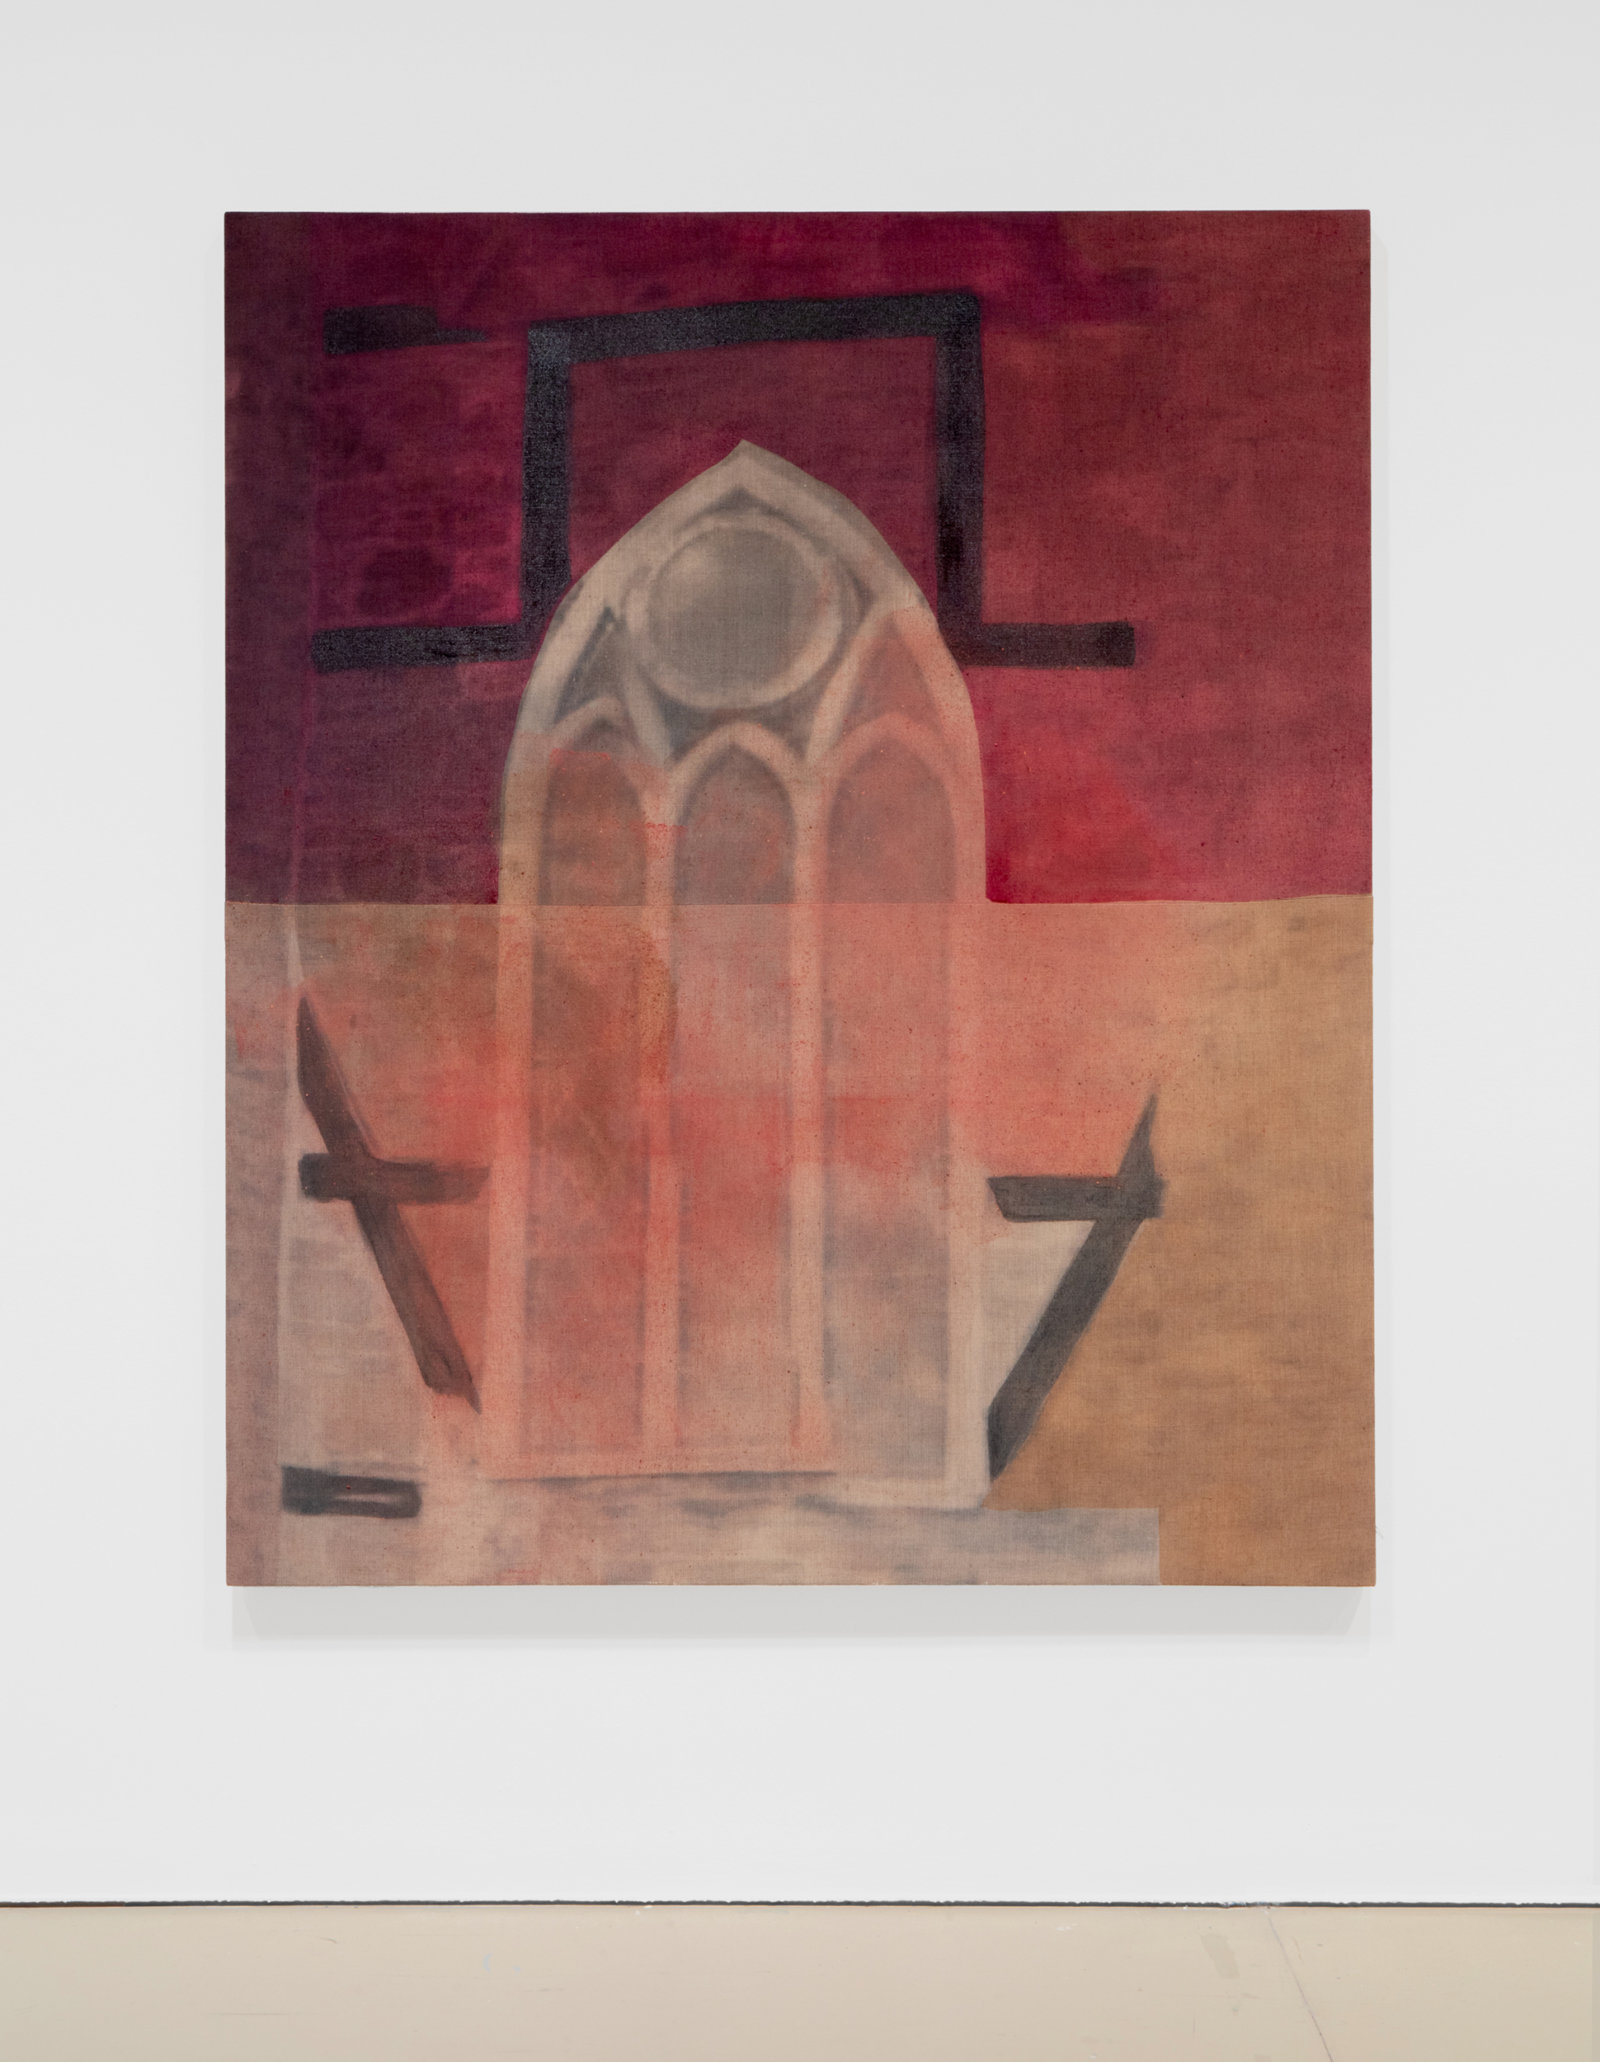 Duane Linklater, they have piled the stone / as they promised / without syrup 5, 2023, digital print on linen, cochineal, tea, sumac, tobacco, charcoal, 72 x 60 in. (183 x 152 cm)